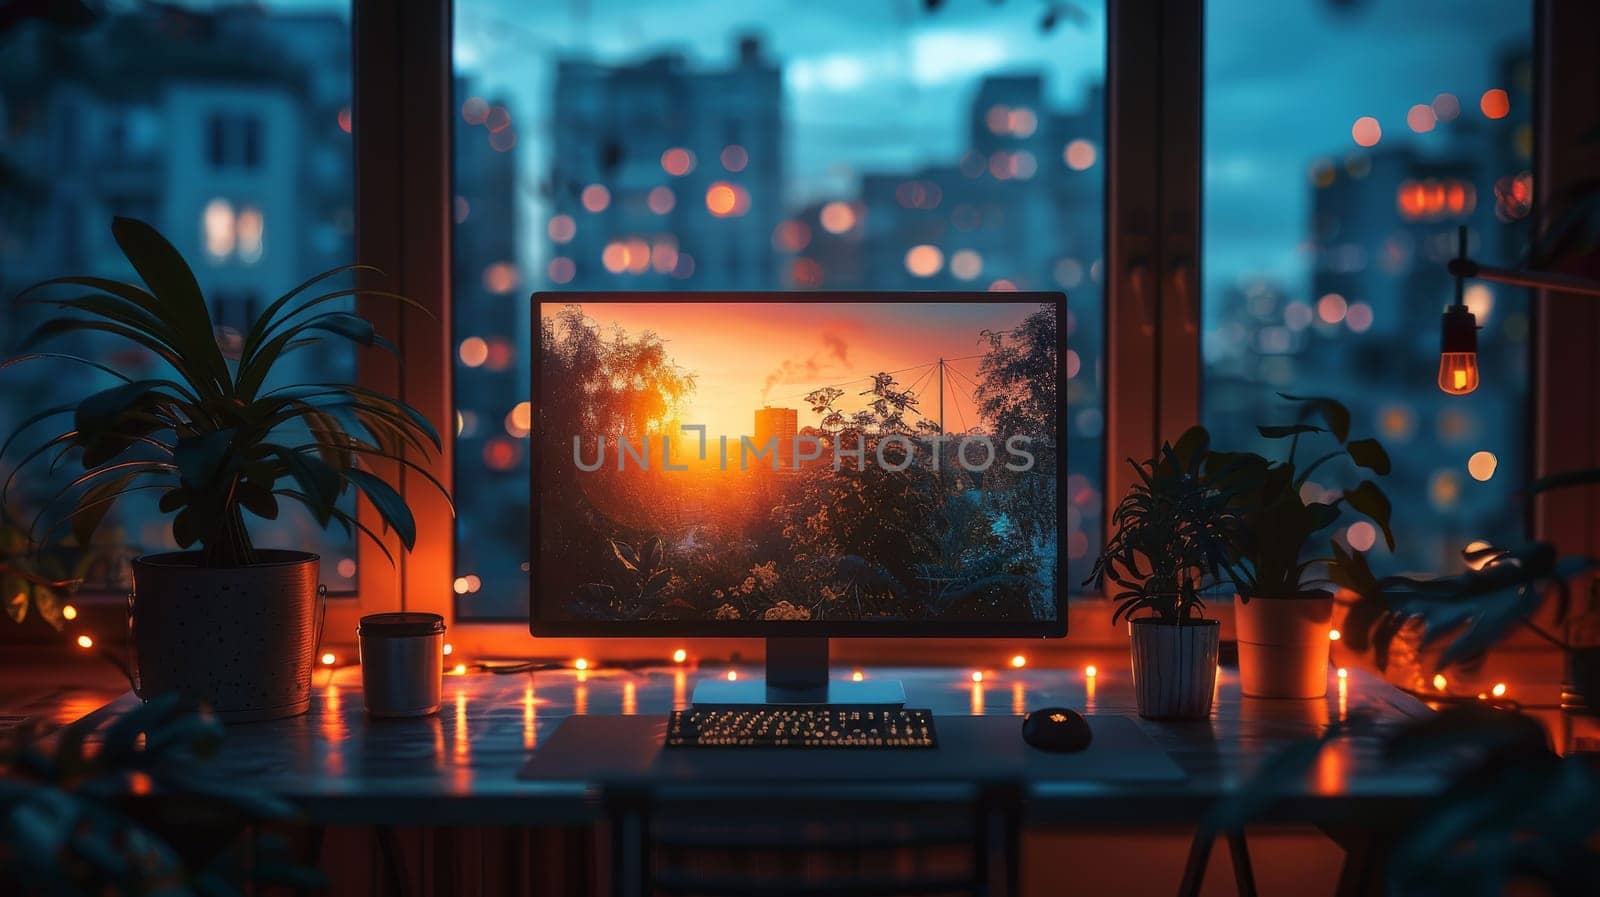 A computer monitor is on a desk with a city view in the background. The city is lit up with a warm glow, creating a cozy and inviting atmosphere. The desk is also adorned with potted plants